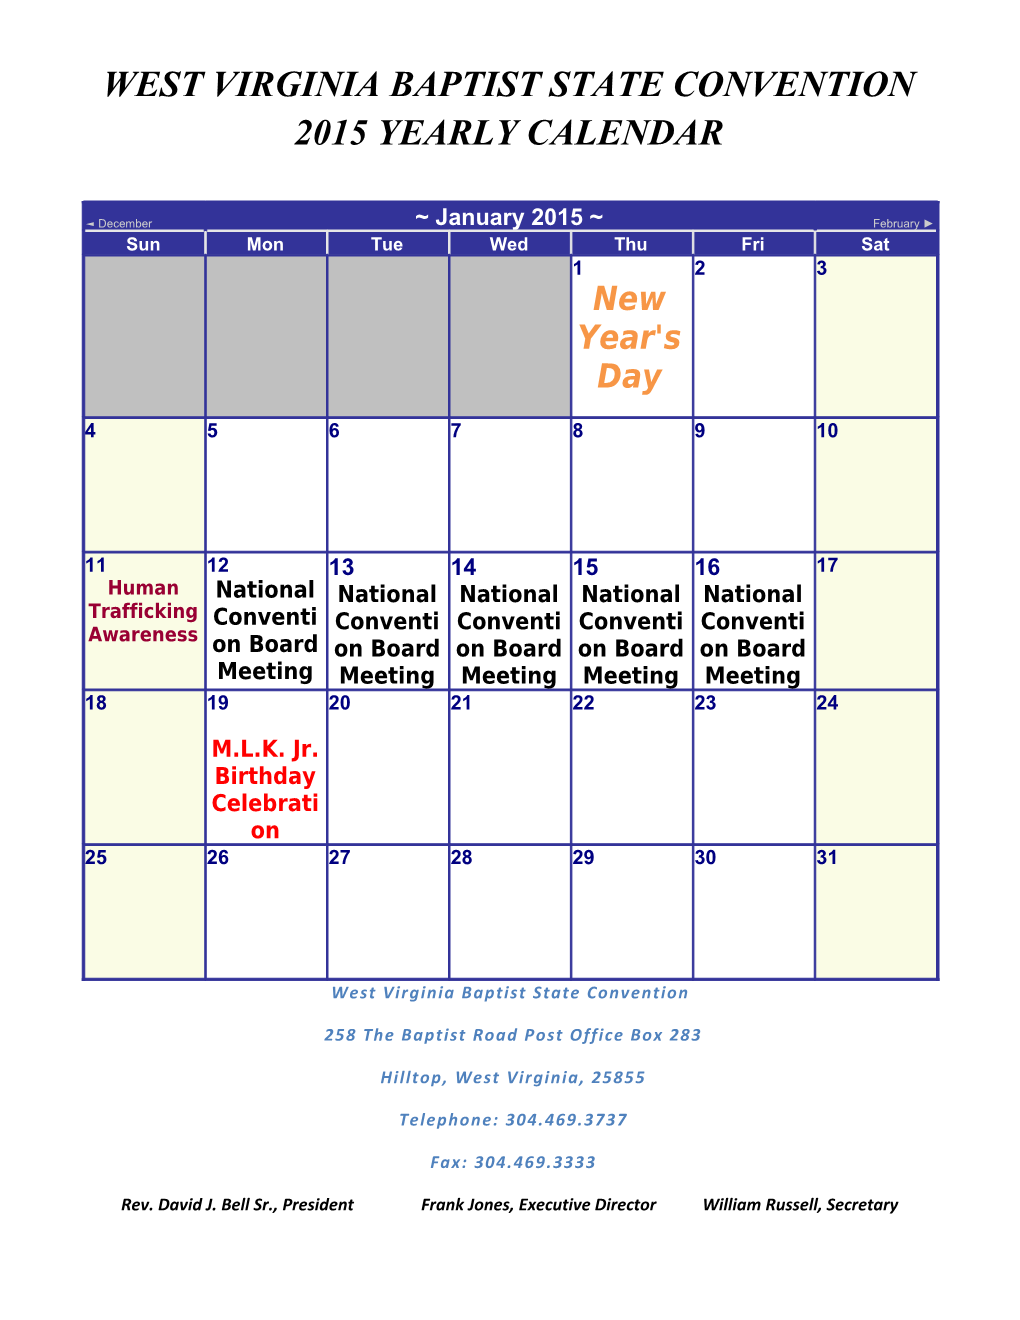 West Virginia Baptist State Convention 2015 Yearly Calendar